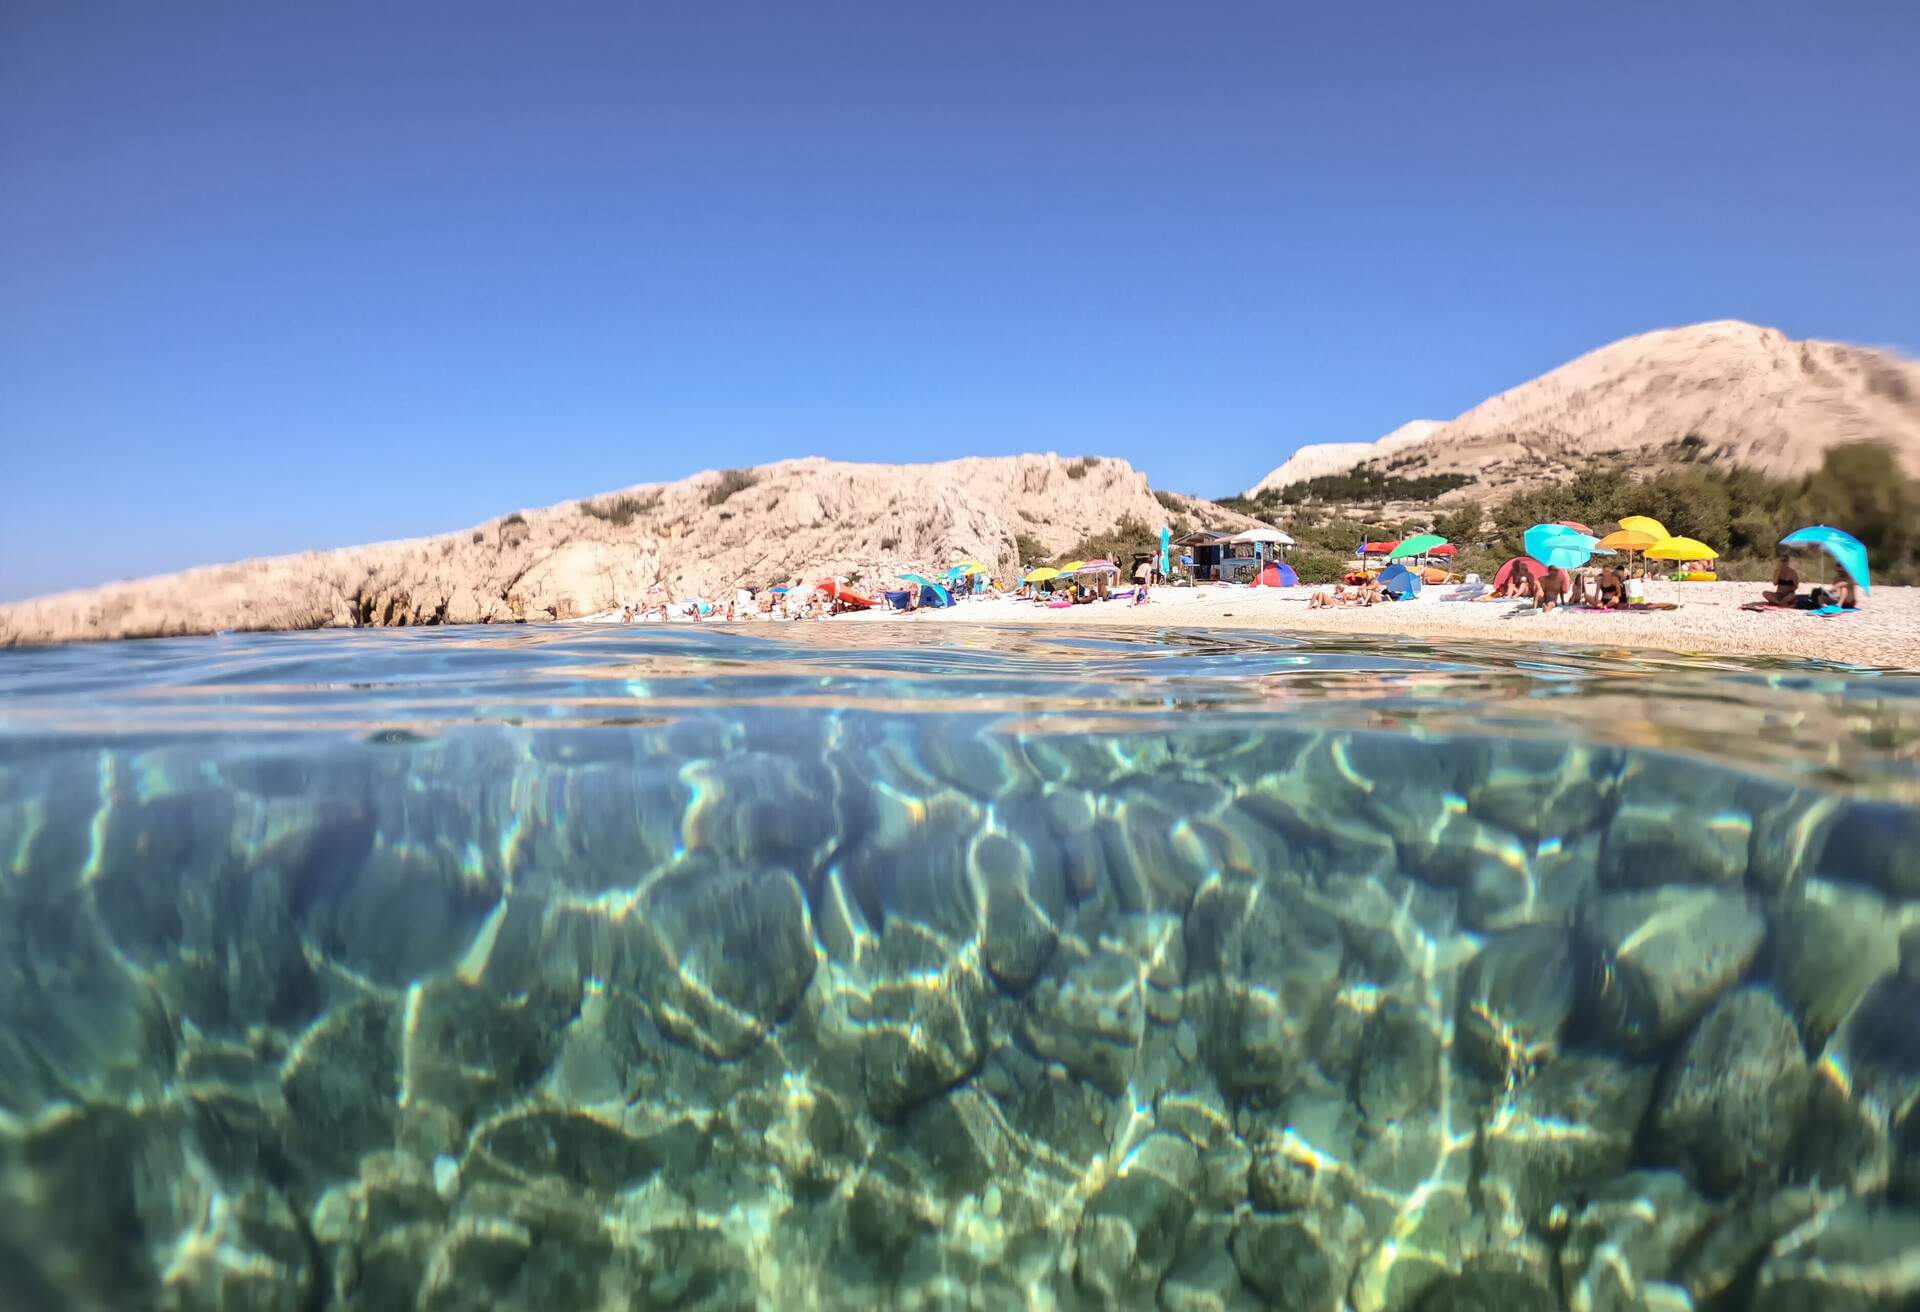 Beach Zala is located in place Stara Baška (Krk) and it is one of the most famous beaches in Croatia